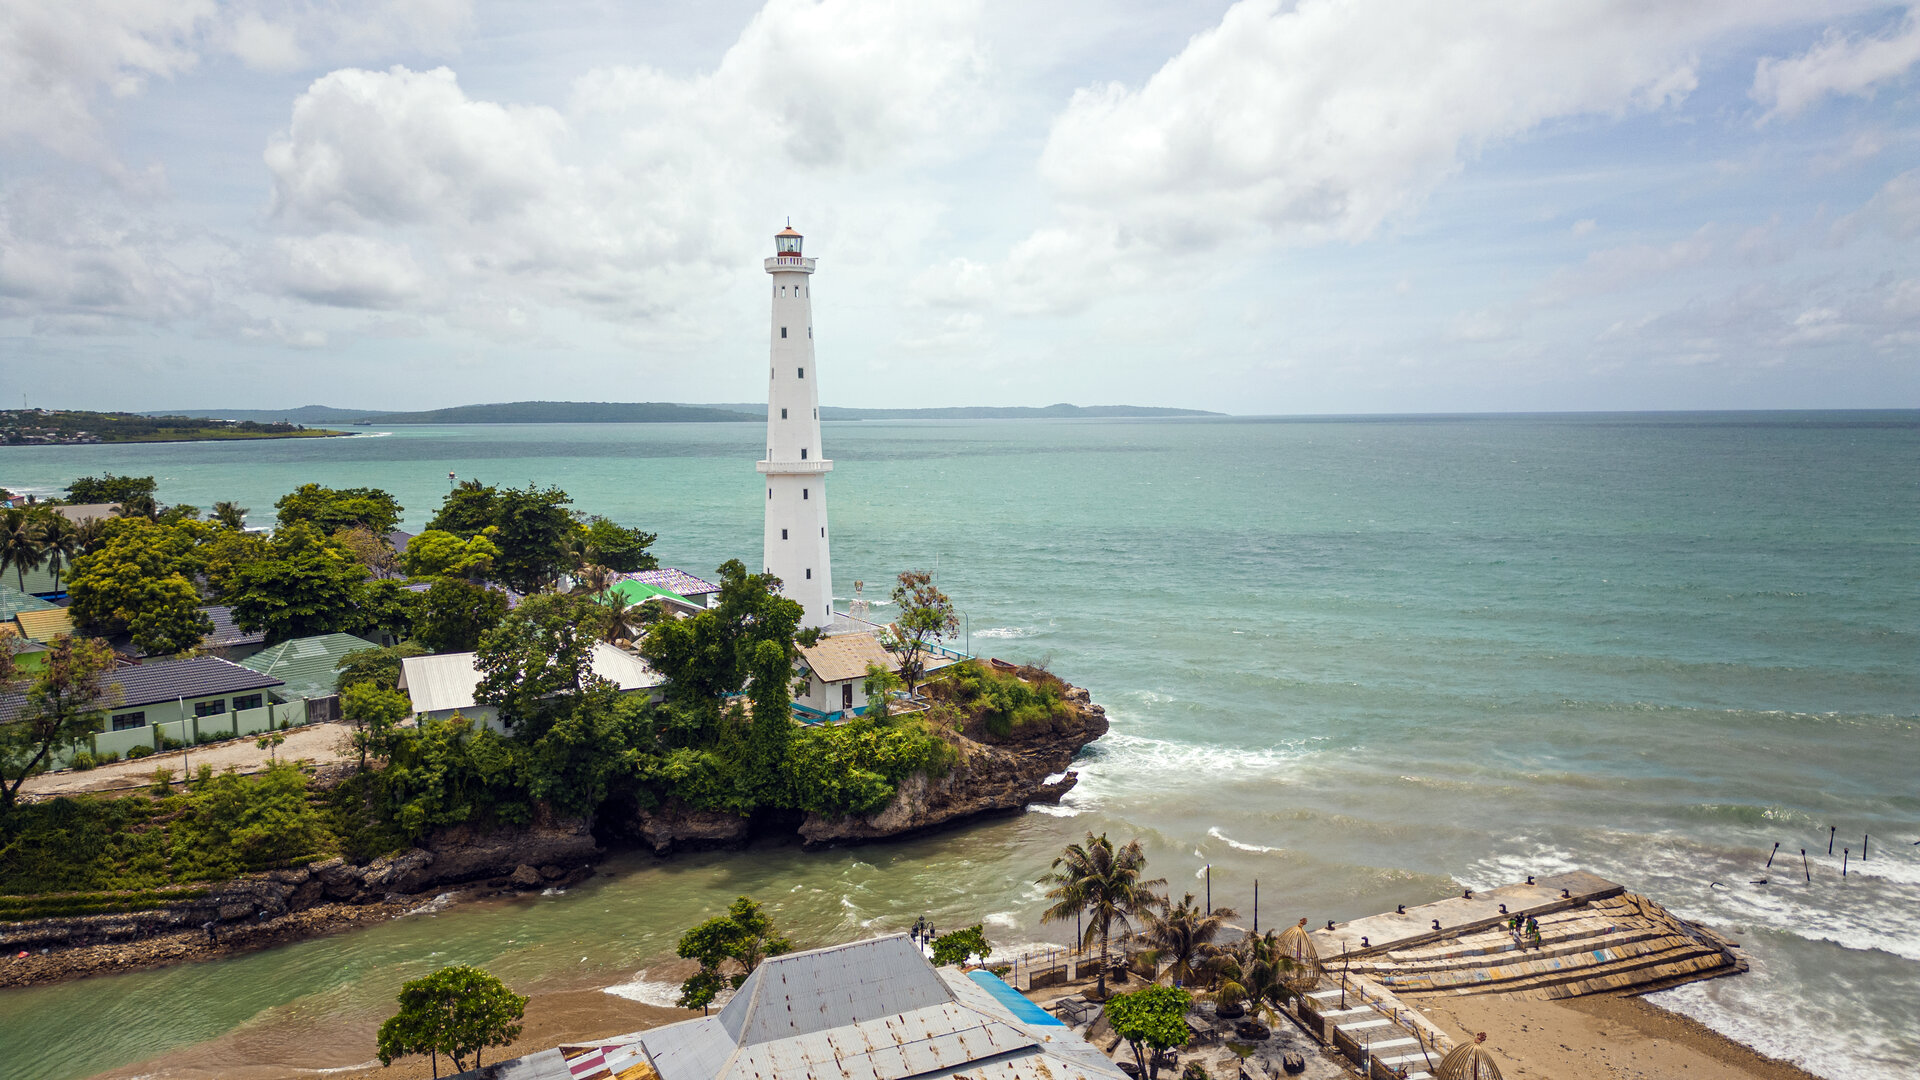 “Tedis Beach” is a popular waterfront in Kupang’s Old City. Its proper name is Lahi Lai Bissi Kopan (LLBK) which in the native Helong language means “the place from which Kupang city began.”